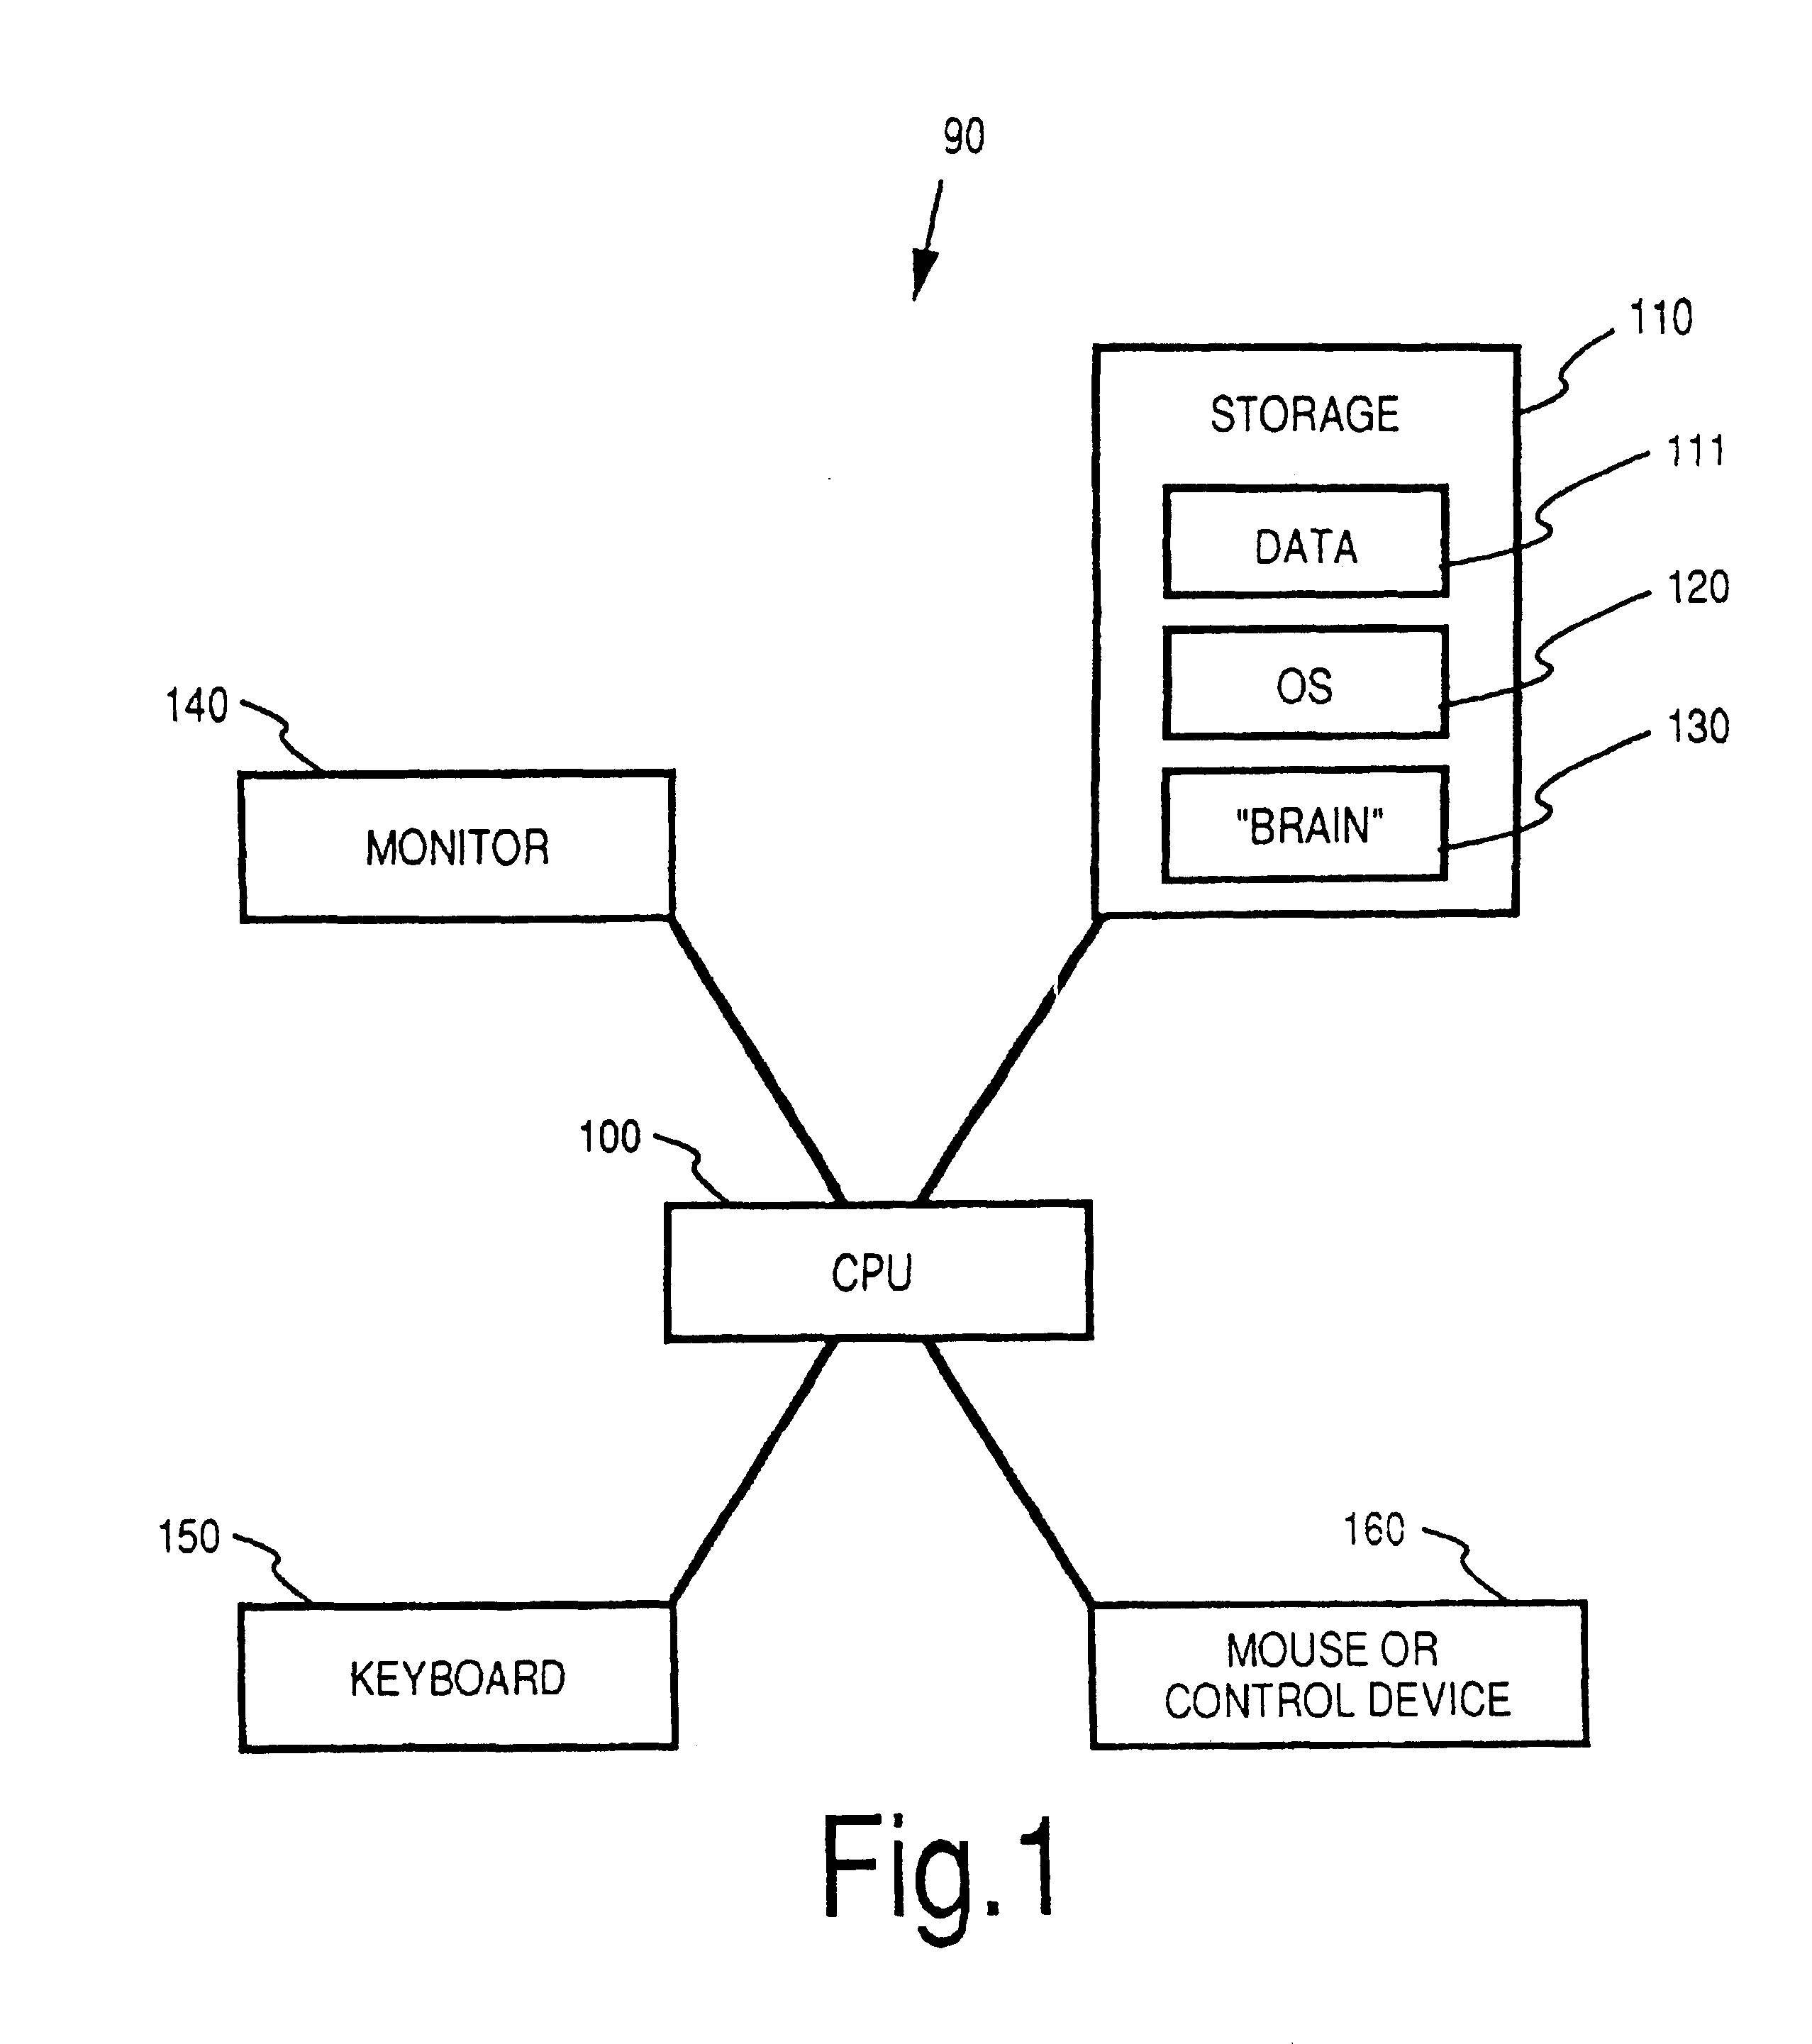 Method and apparatus for displaying a network of thoughts from a thought's perspective